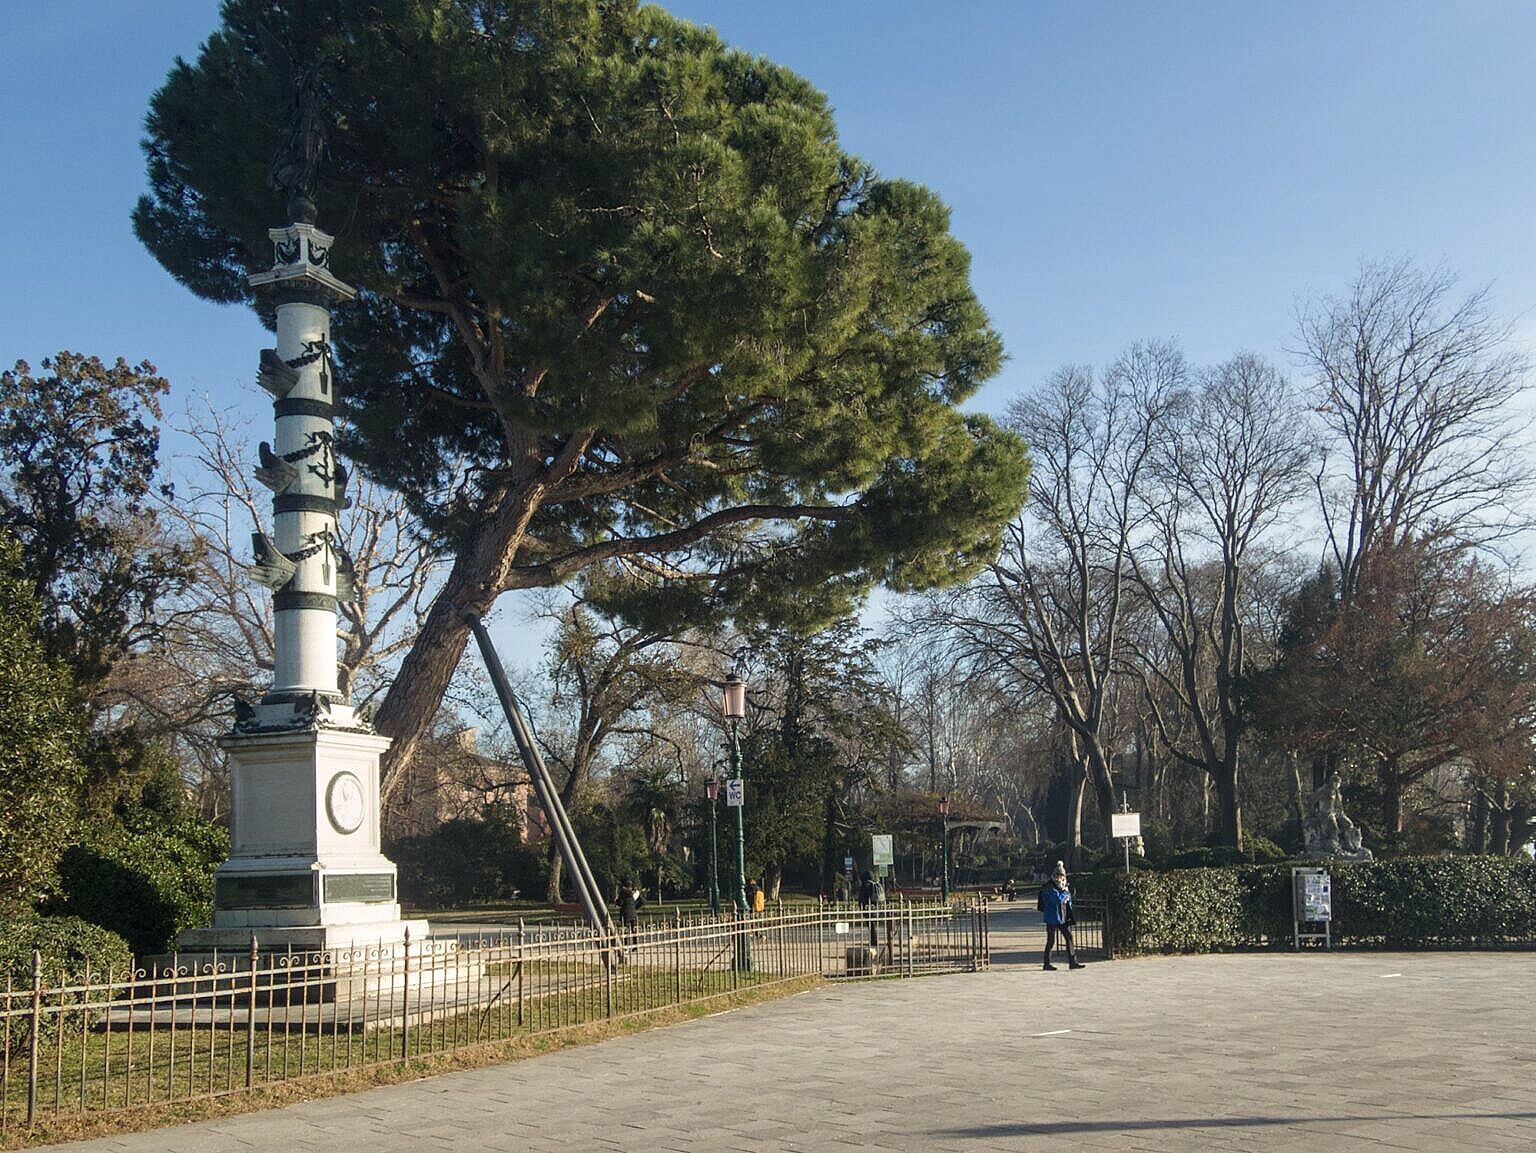 Monument for the Battle of Lissa (1866) in the Giardini Pubblici